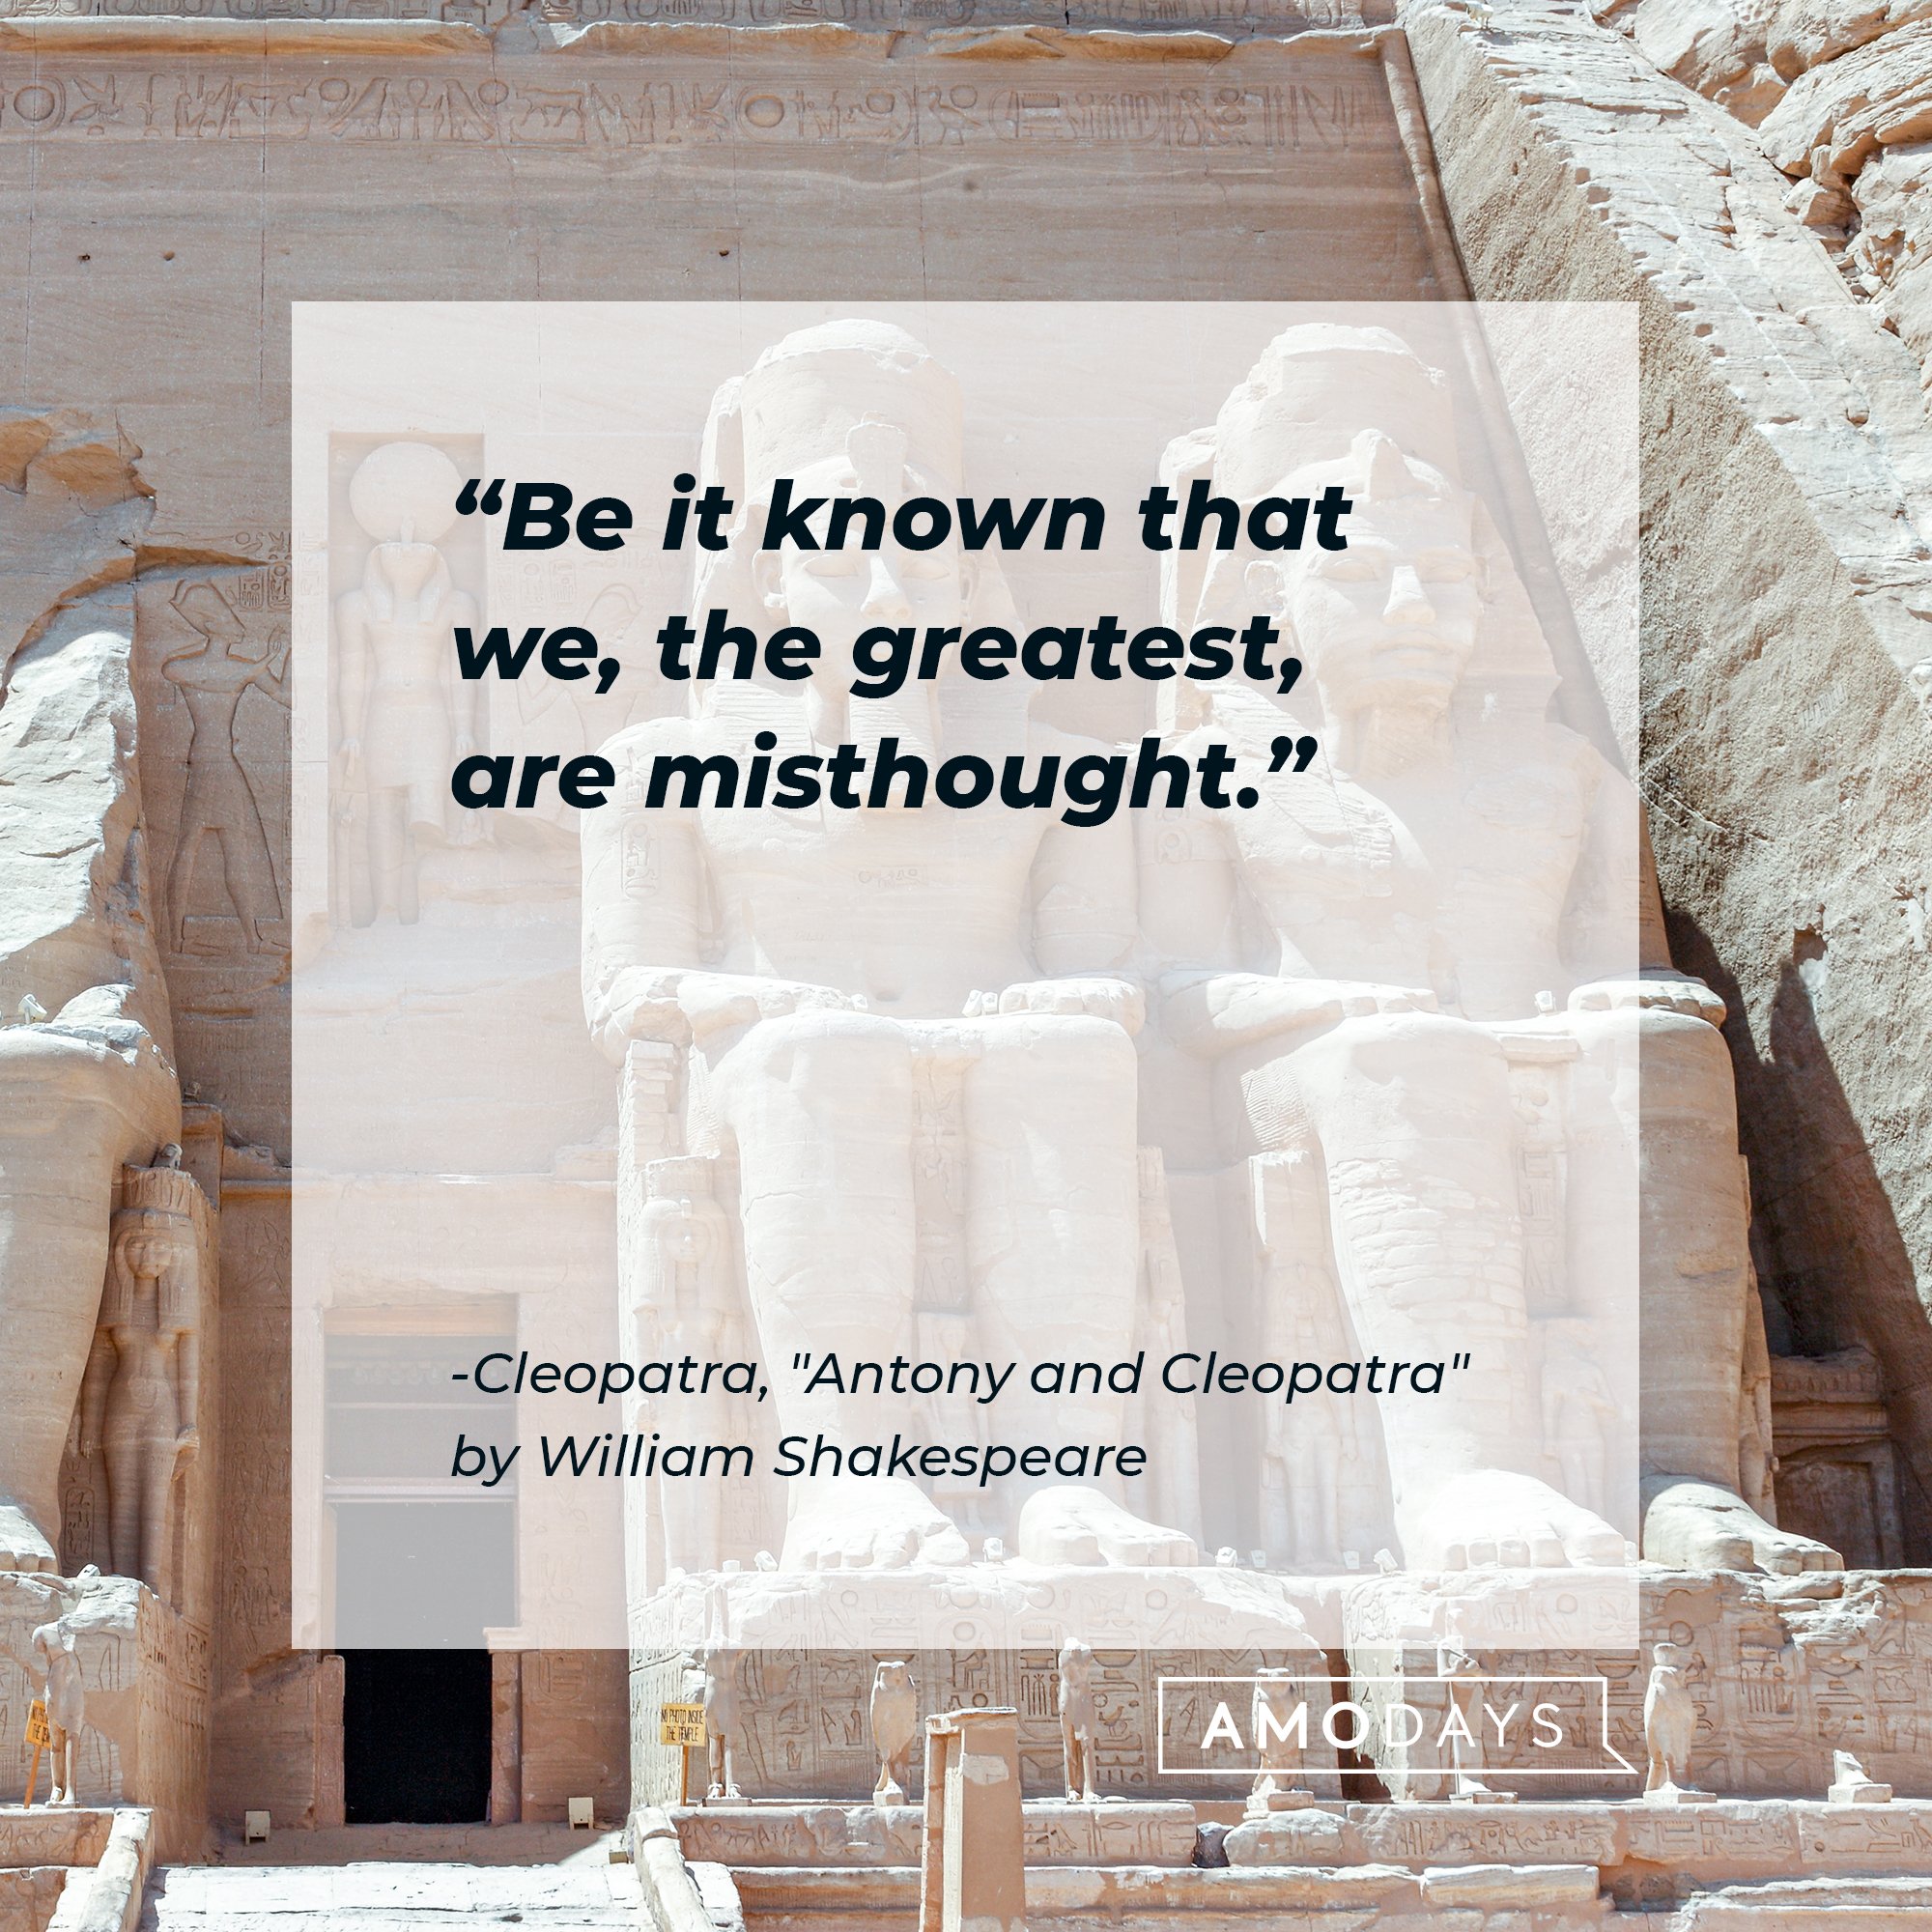  Cleopatra’s quote from "Antony and Cleopatra" by William Shakespeare: "Be it known that we, the greatest, are misthought." | Image: AmoDays